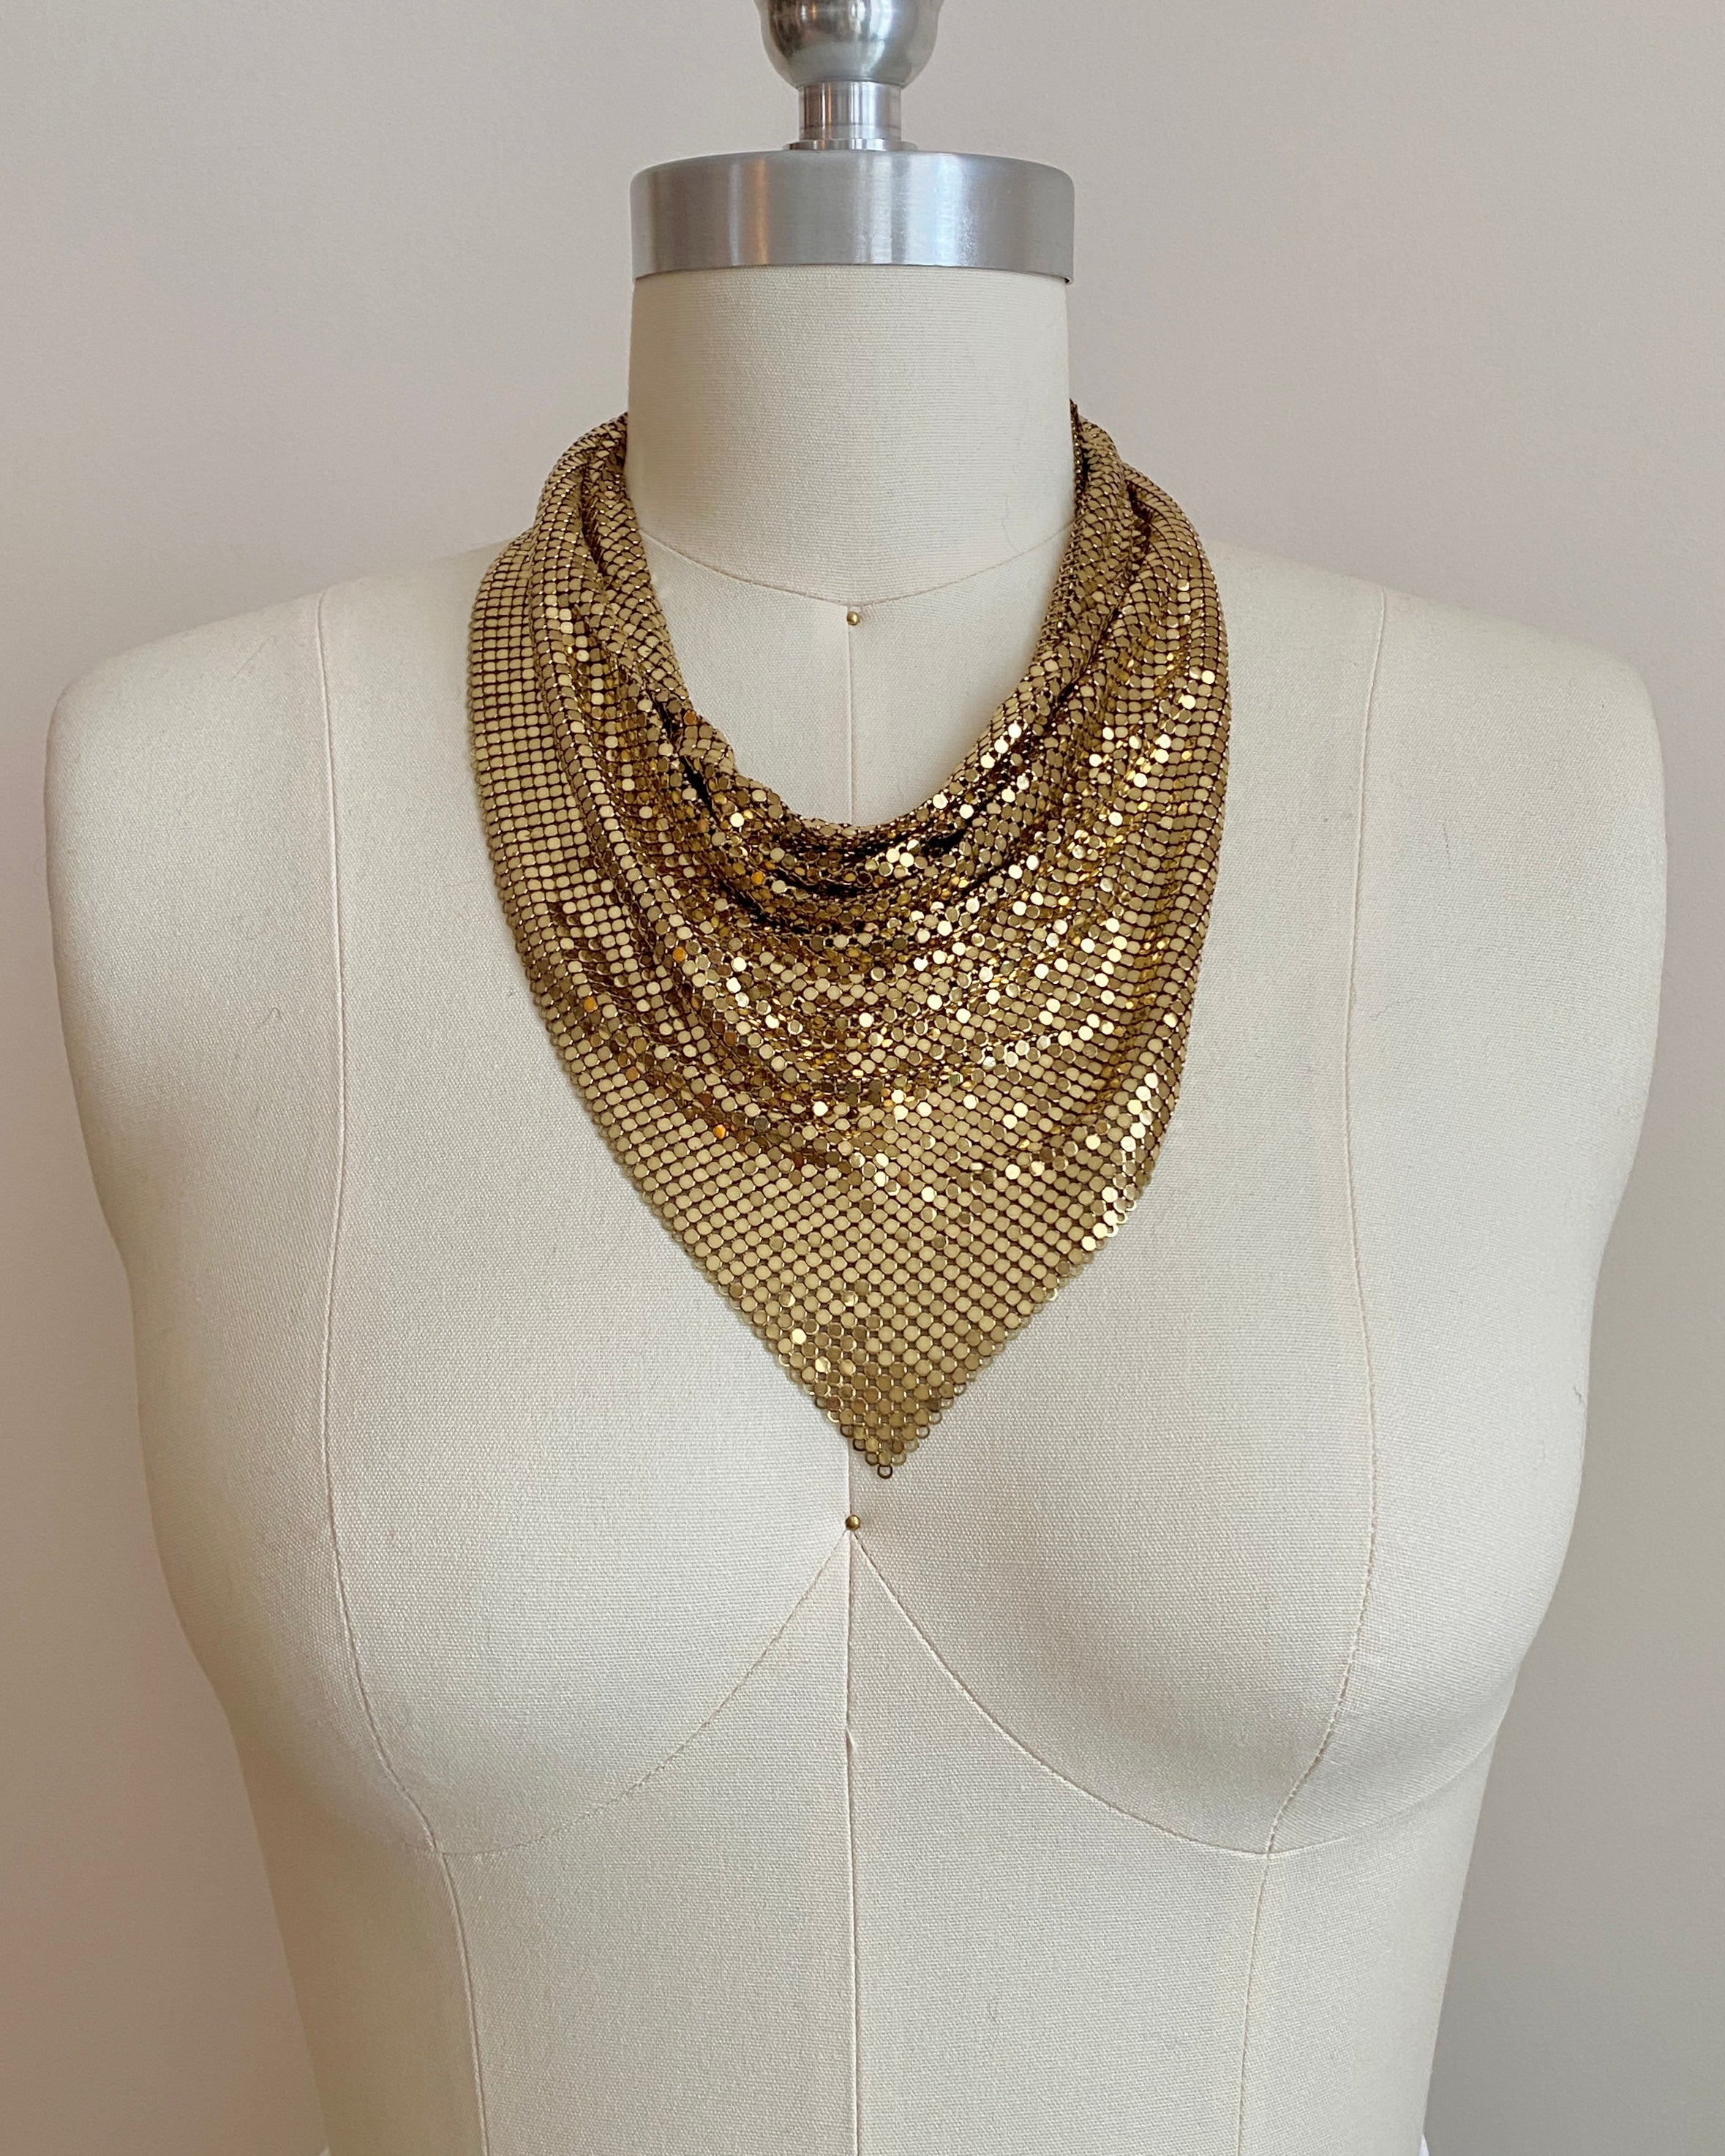 Vintage 1950s Whiting and Davis Gold Mesh Chain Mail Scarf Necklace